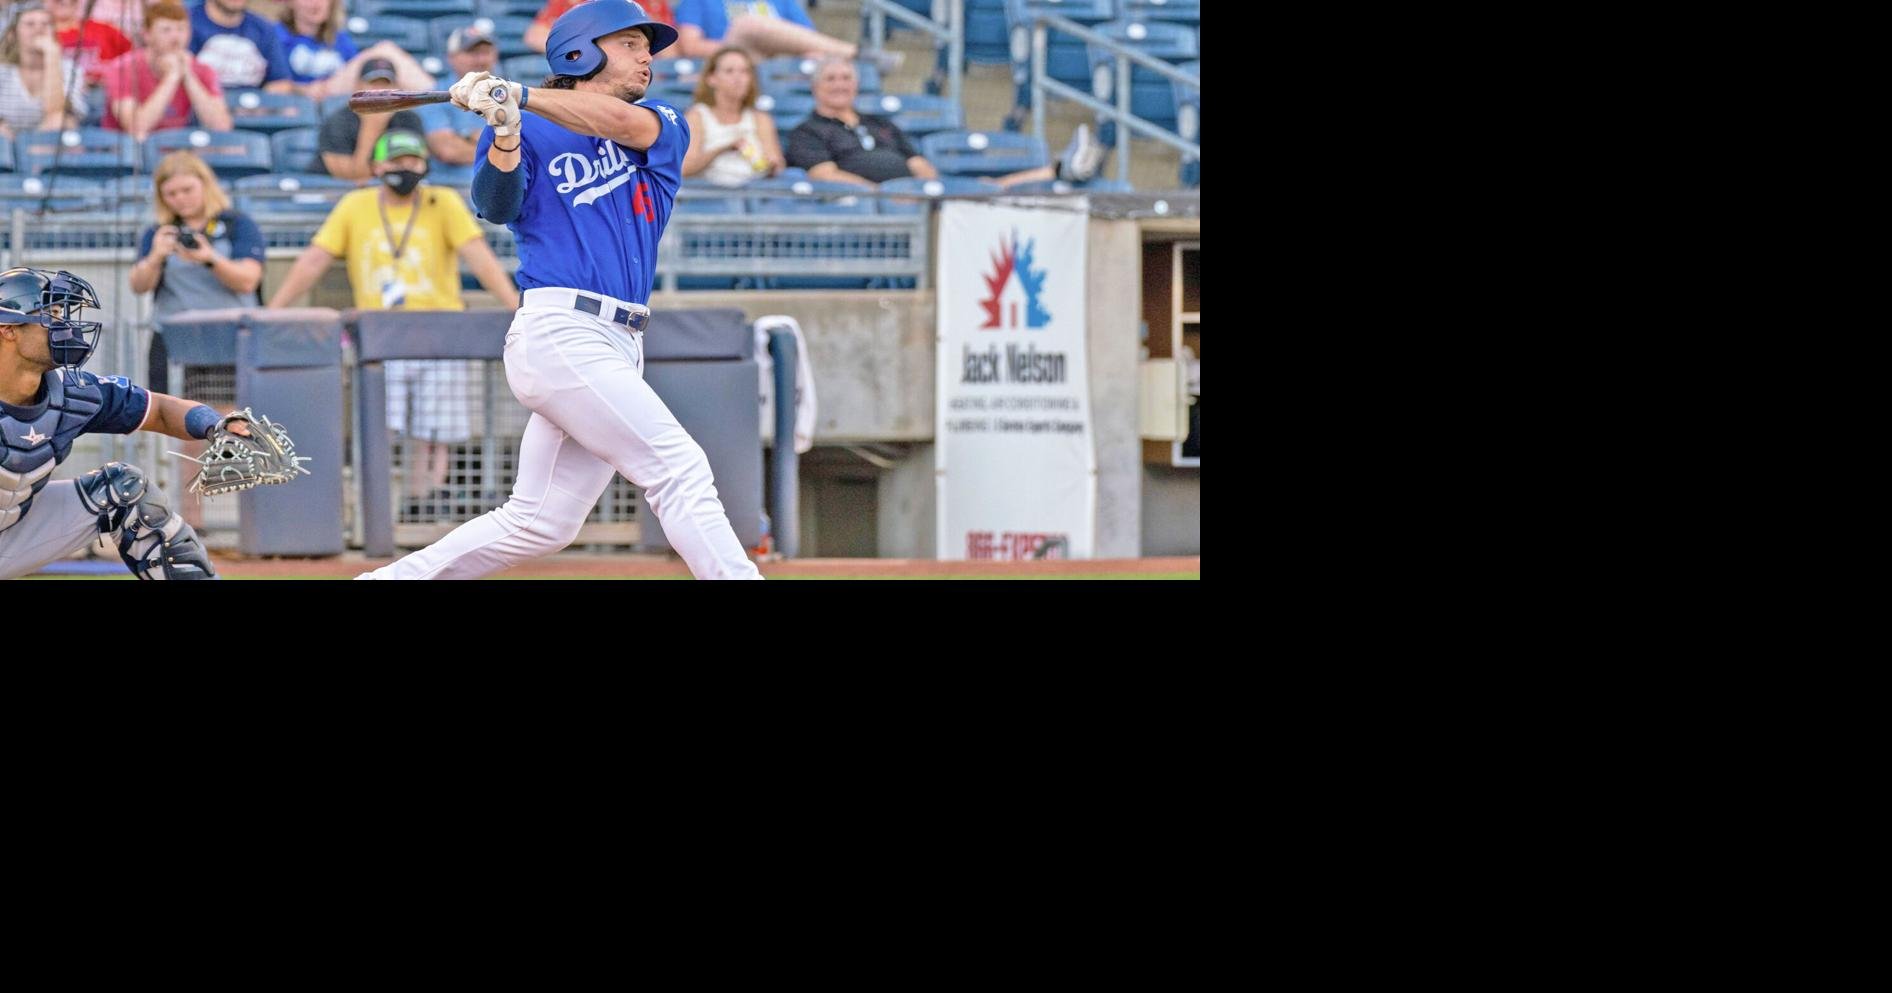 Serra graduate James Outman named Double-A Central Hitter of the